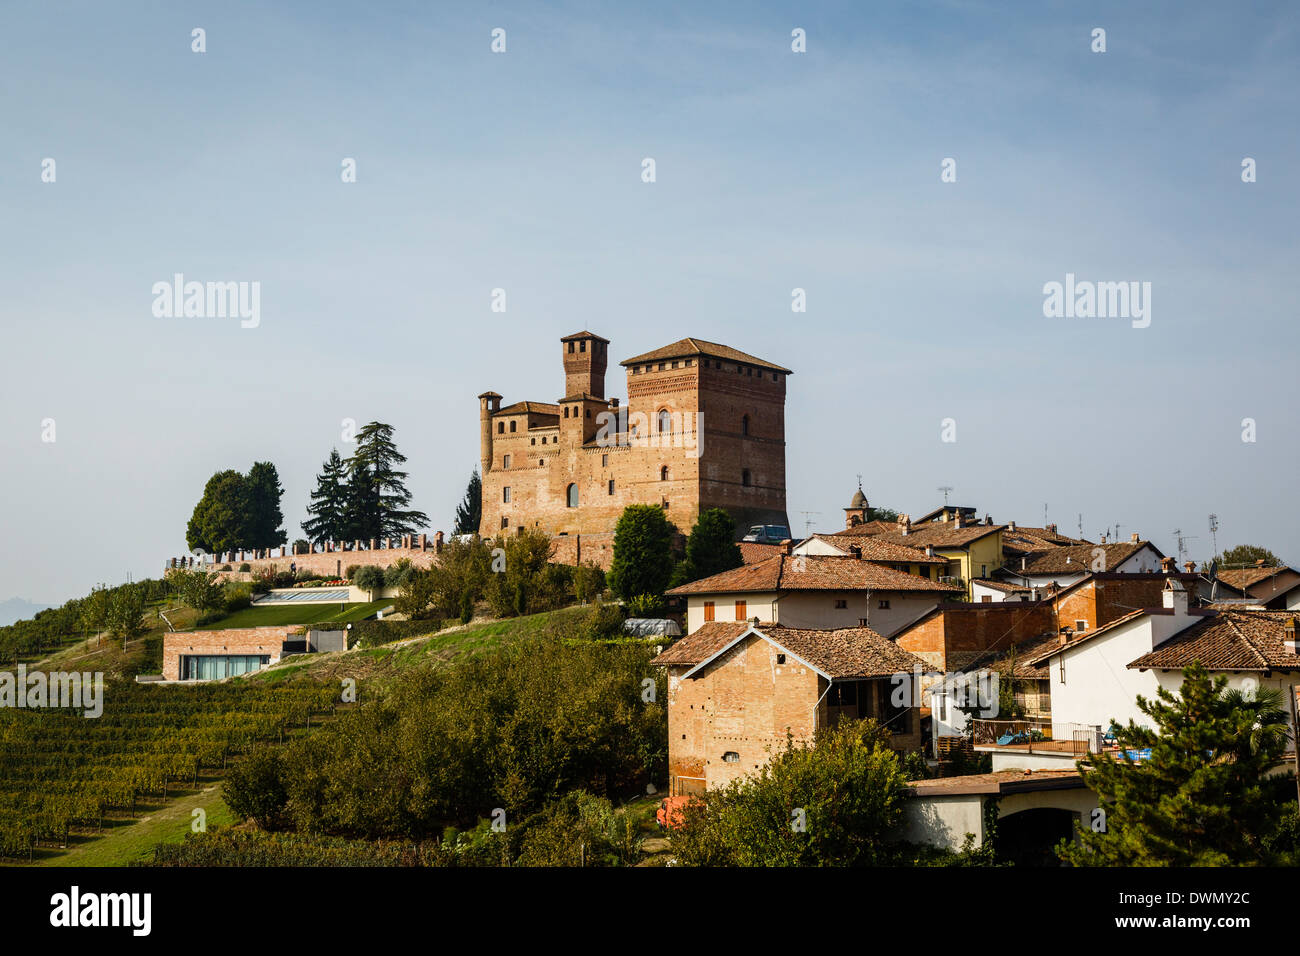 View over Grinzane Cavour castle, Langhe, Cuneo district, Piedmont, Italy, Europe Stock Photo